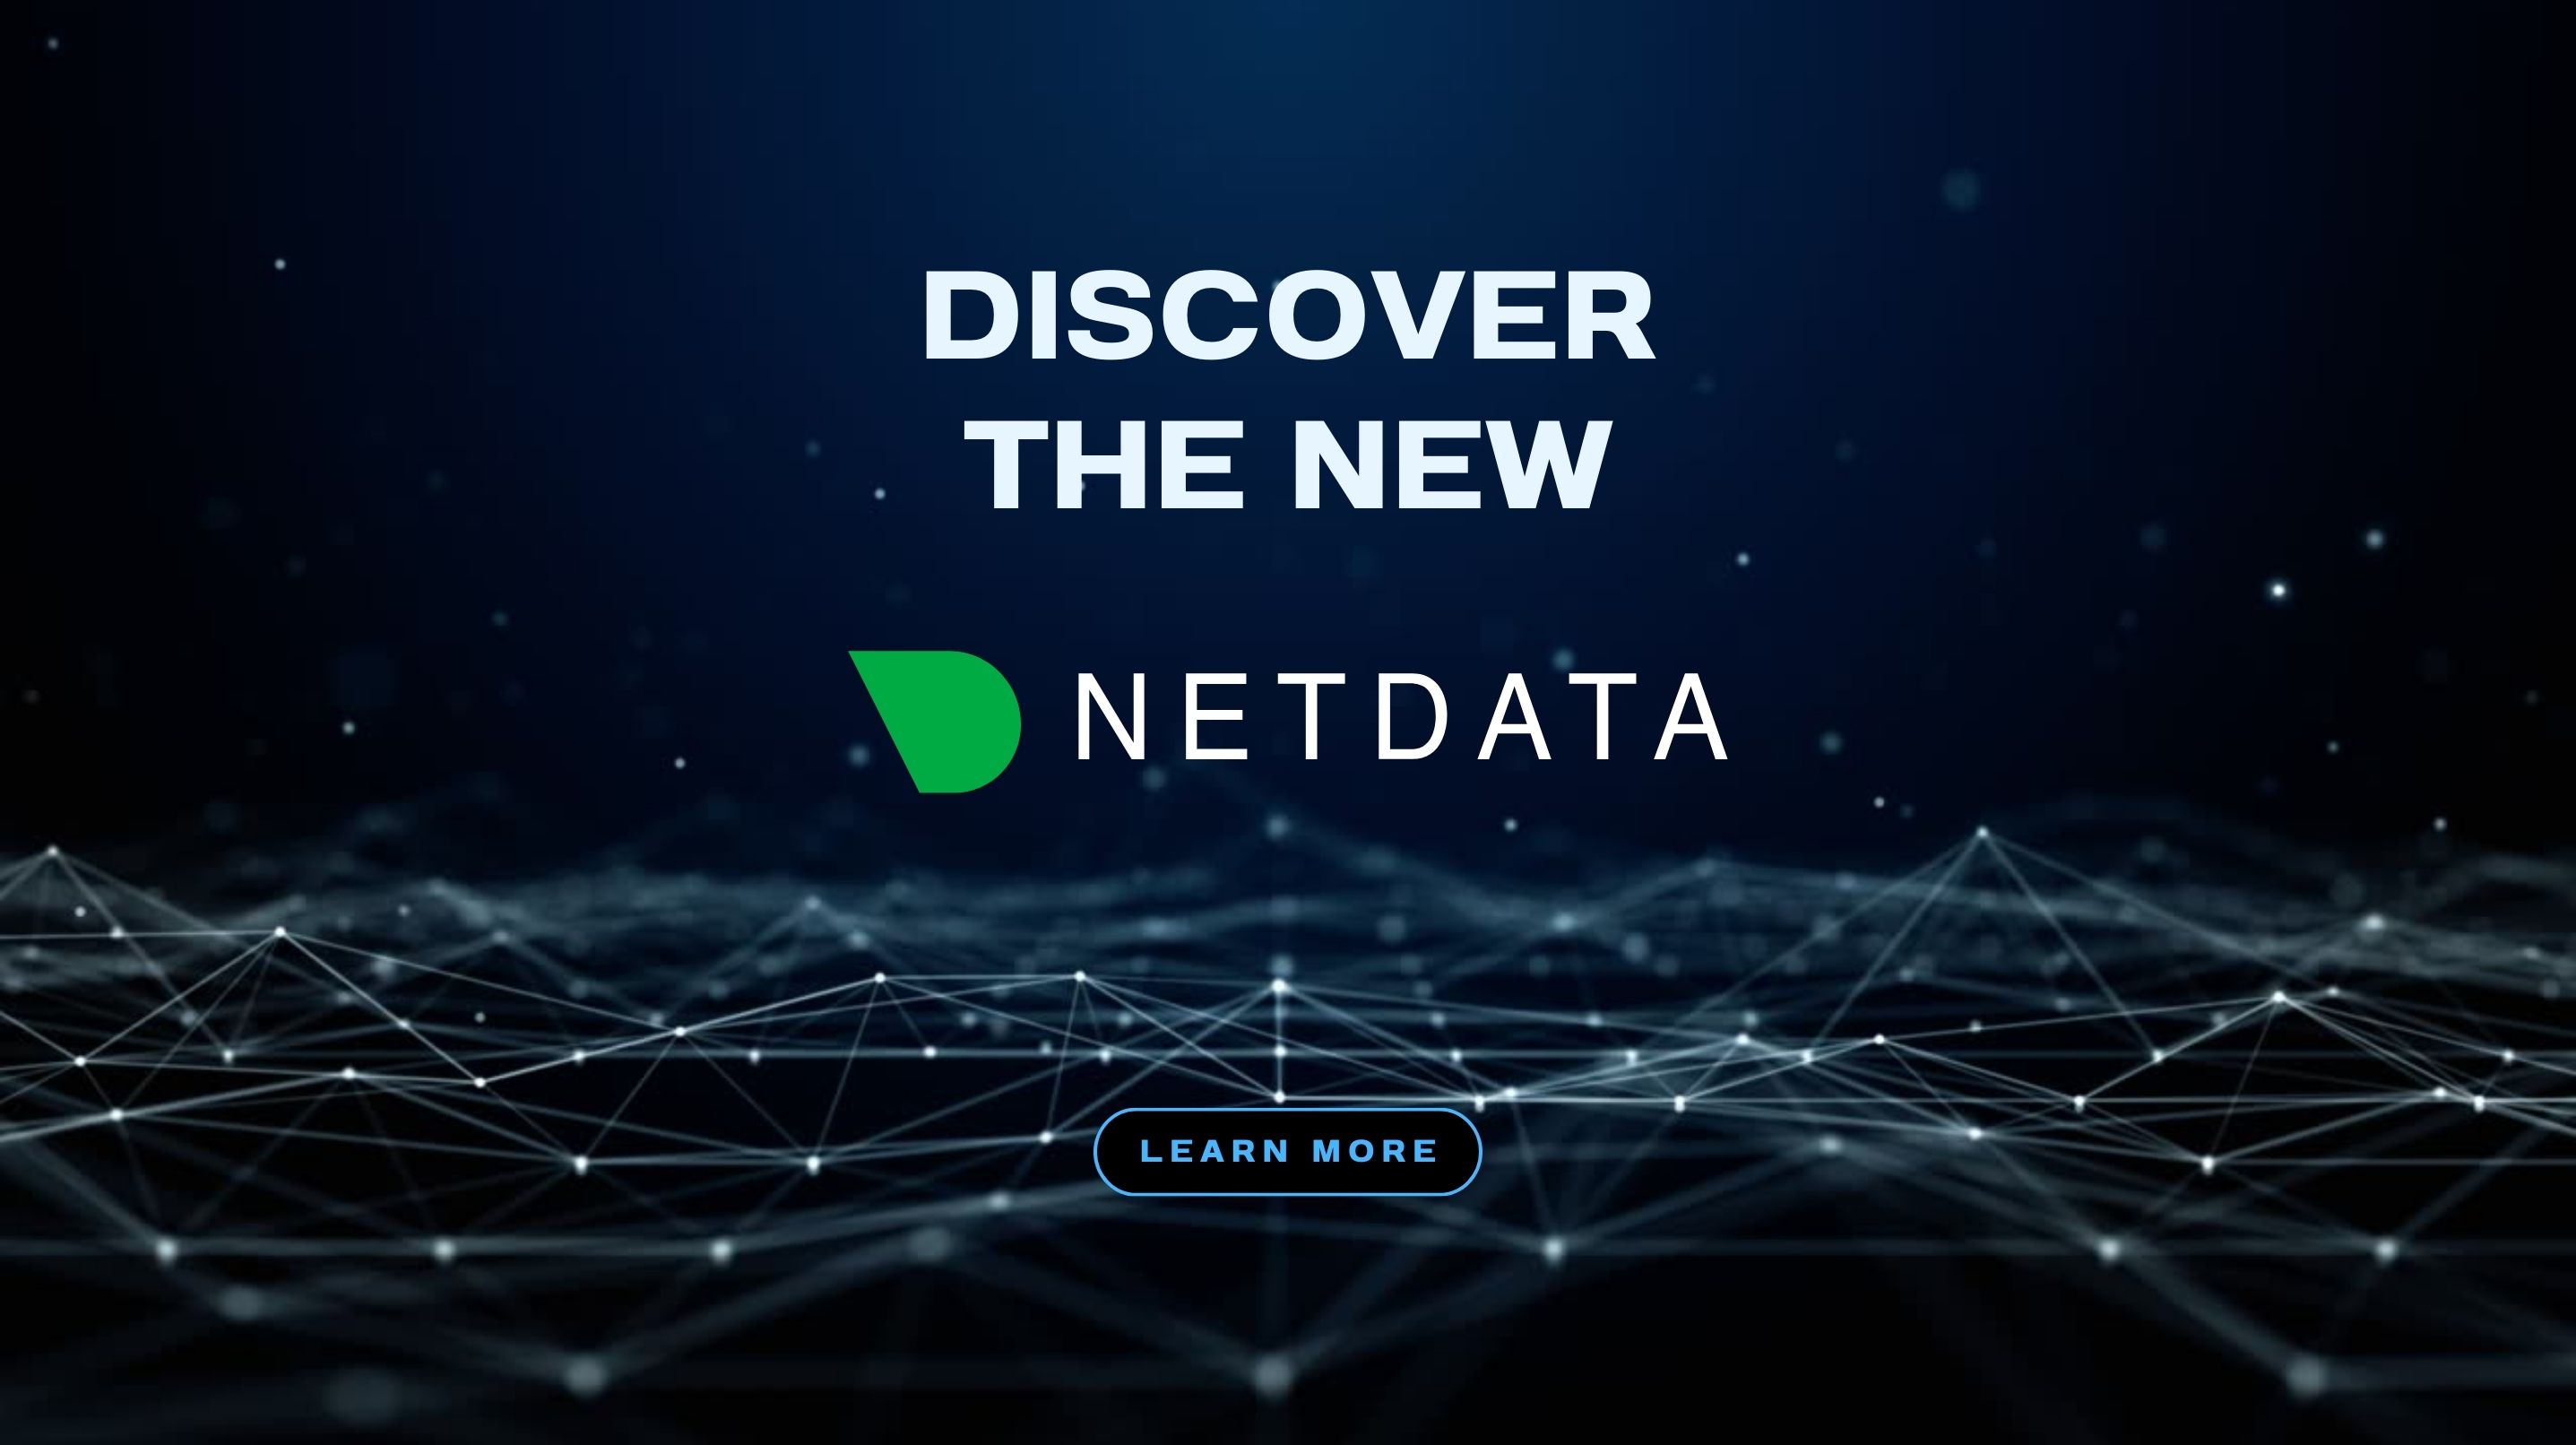 The New Netdata